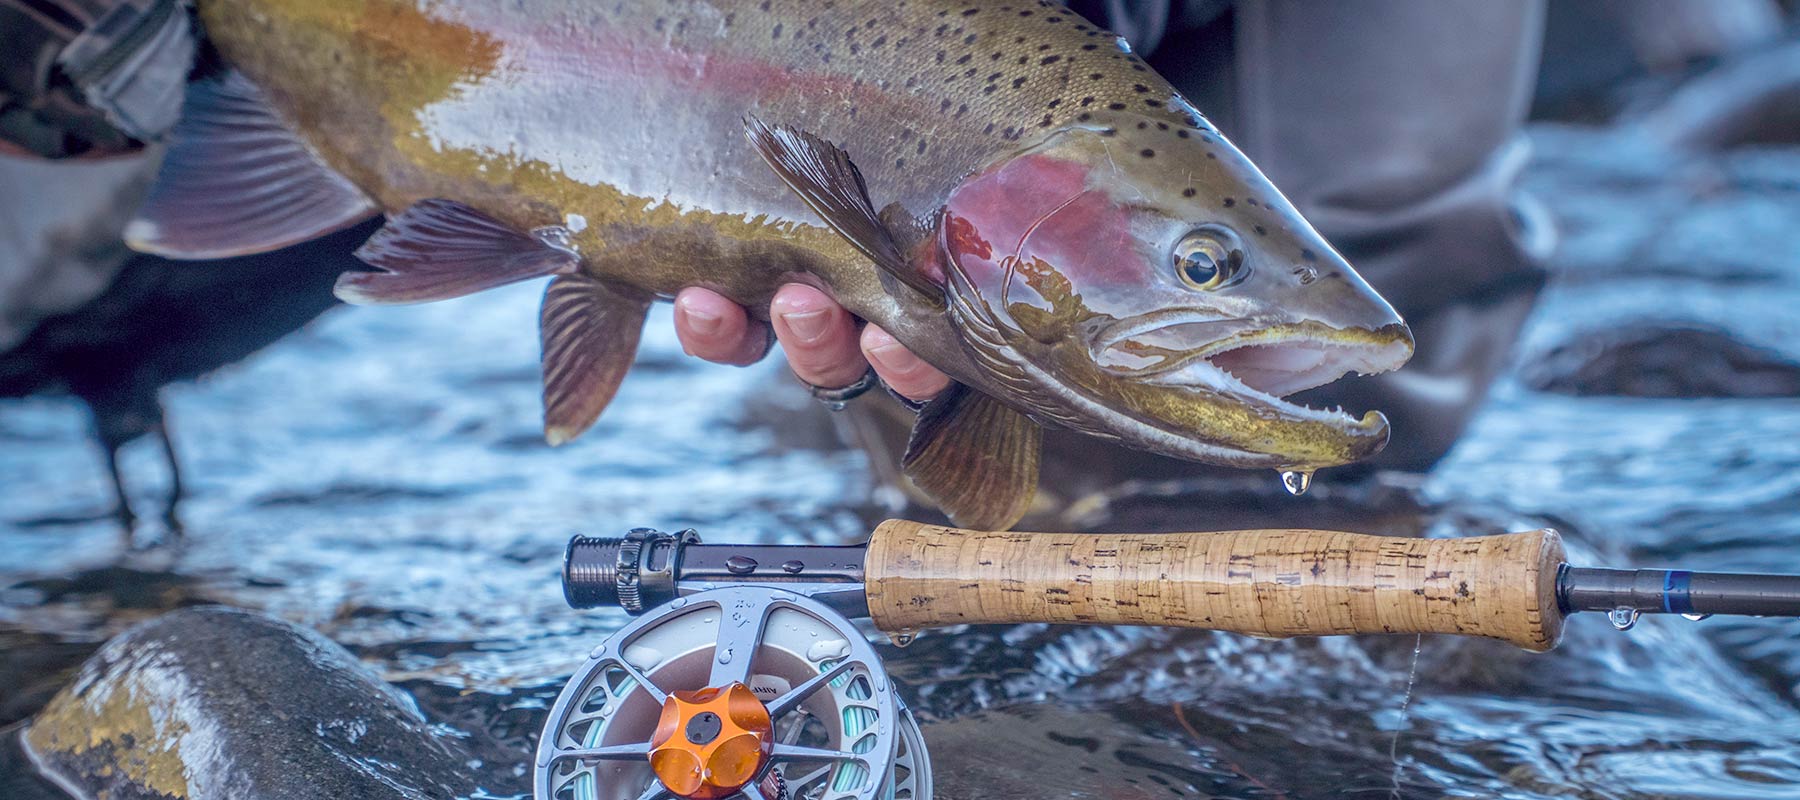 Caught Trout with Fly-Fishing Reel in Jackson Hole, Wyoming